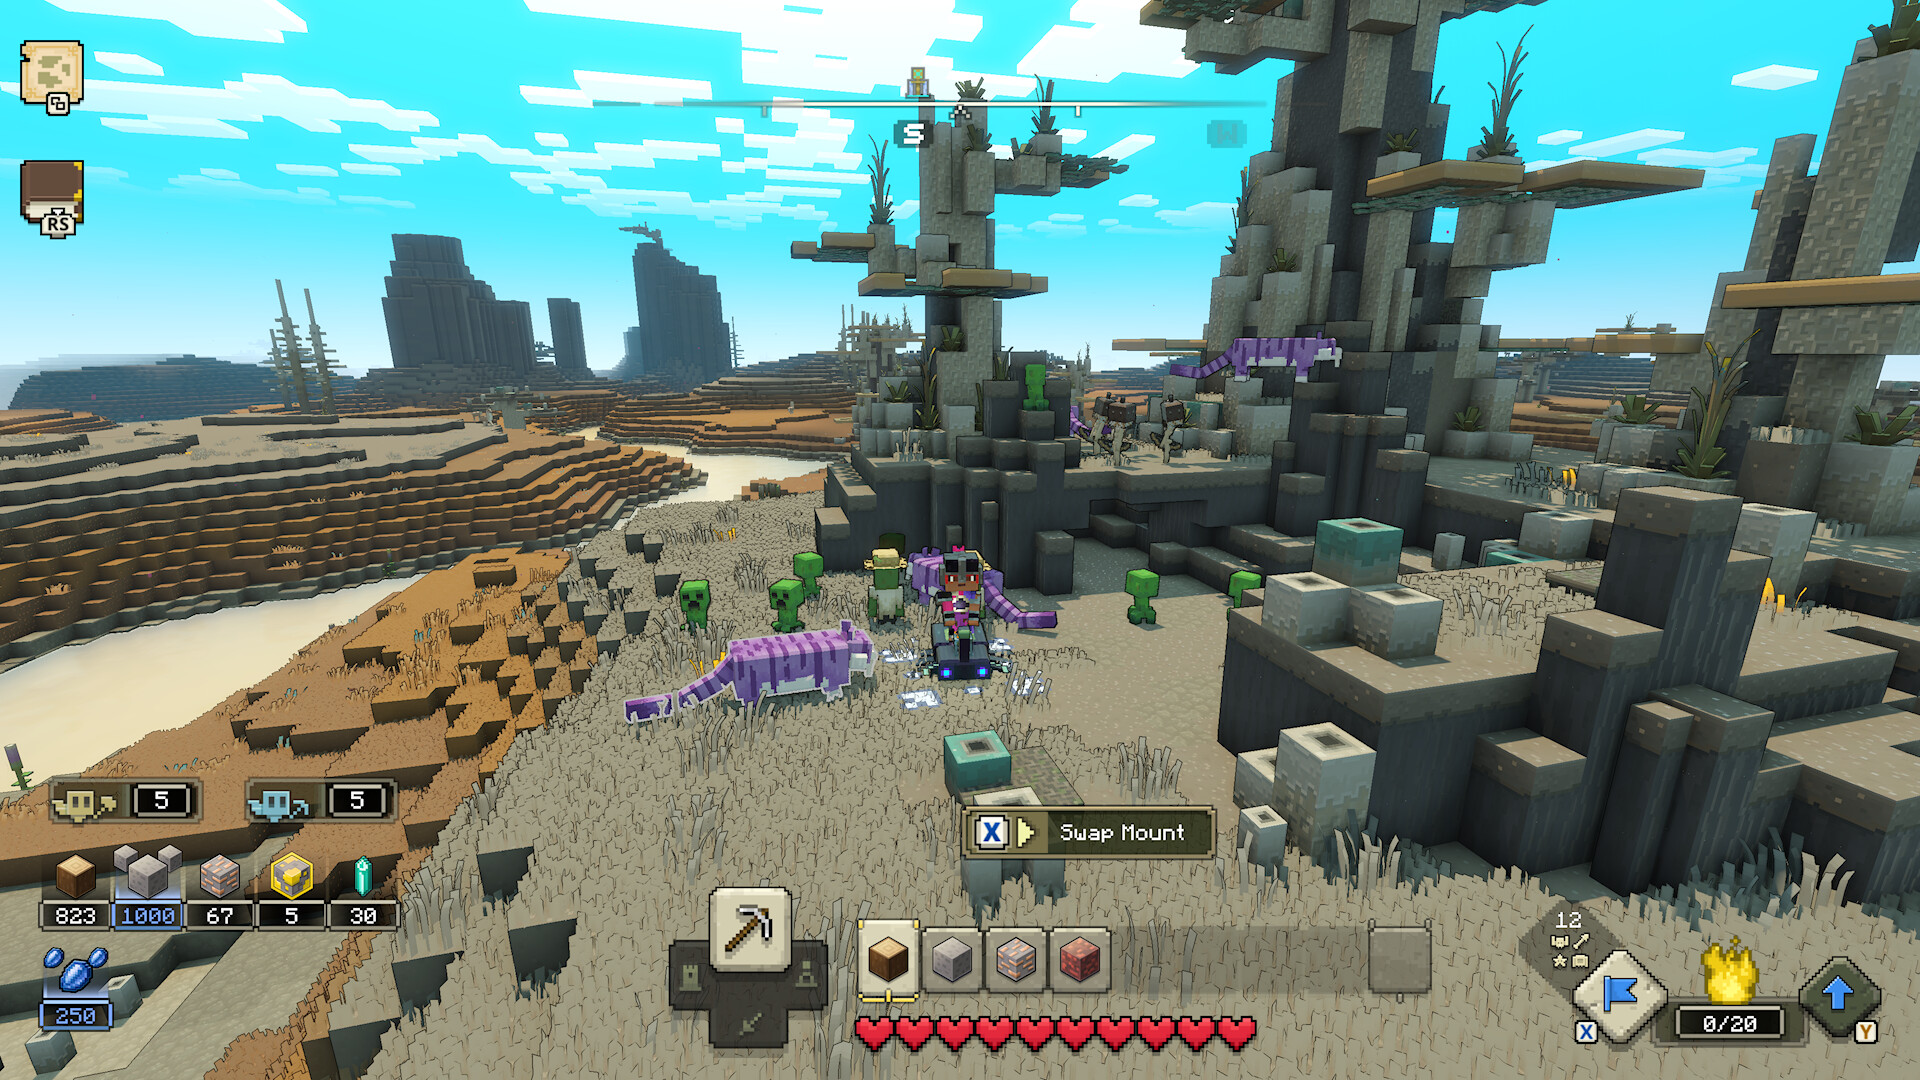 Minecraft Legends devs say game could take 18-20 hours to beat